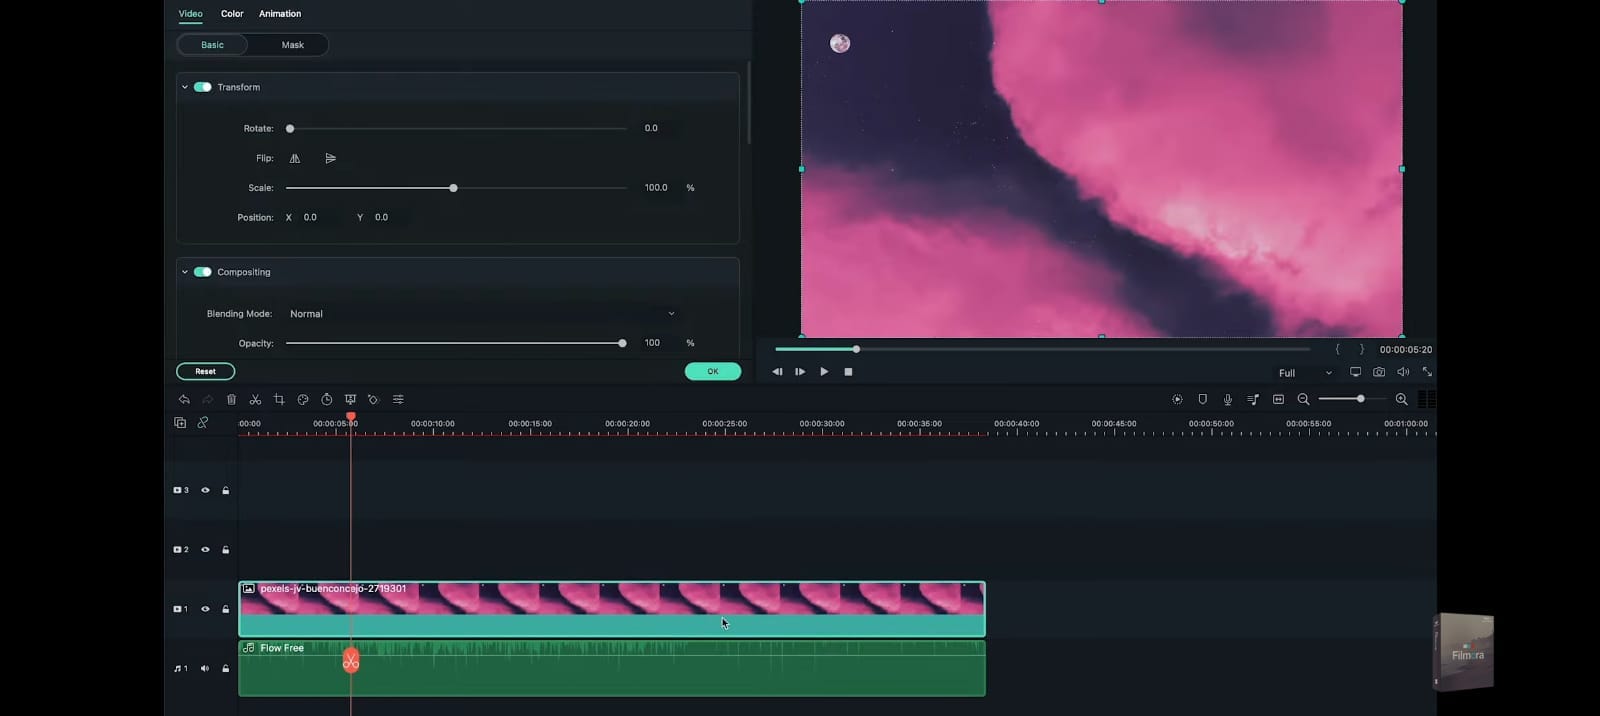 make changes to the quality of the audio visualizer